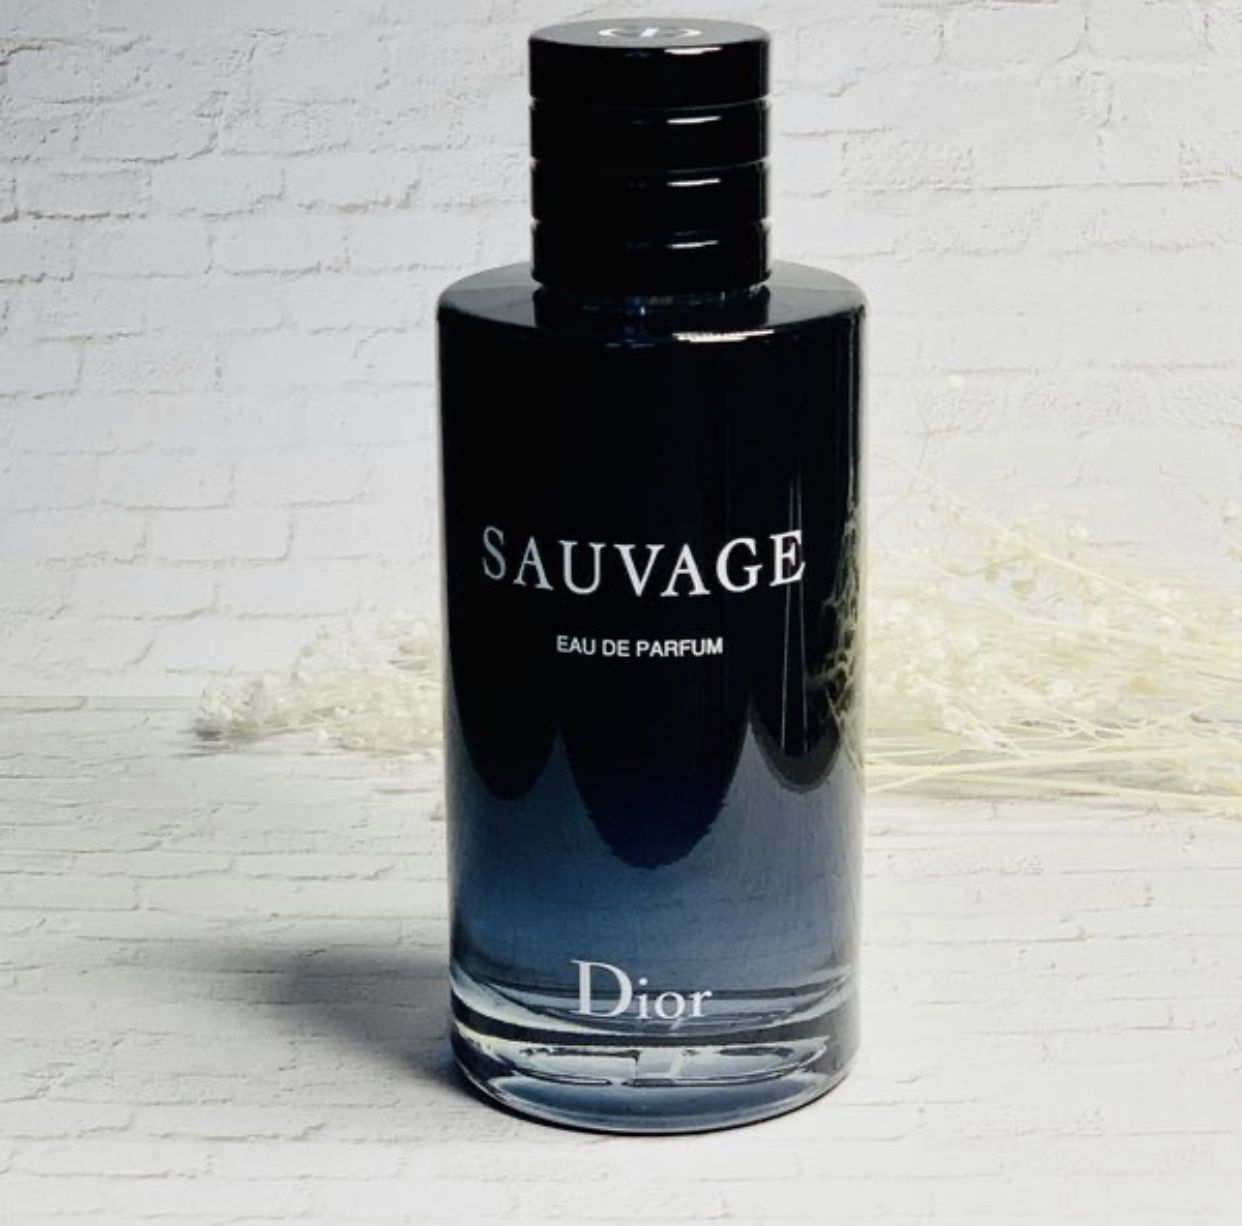 Dior Sauvage EDP 6.8oz Eau de Parfum Unbox New never use Retail $170 Fragrance Family: Earthy & Woody Scent Type: Citrus & Woods Key Notes: Ber